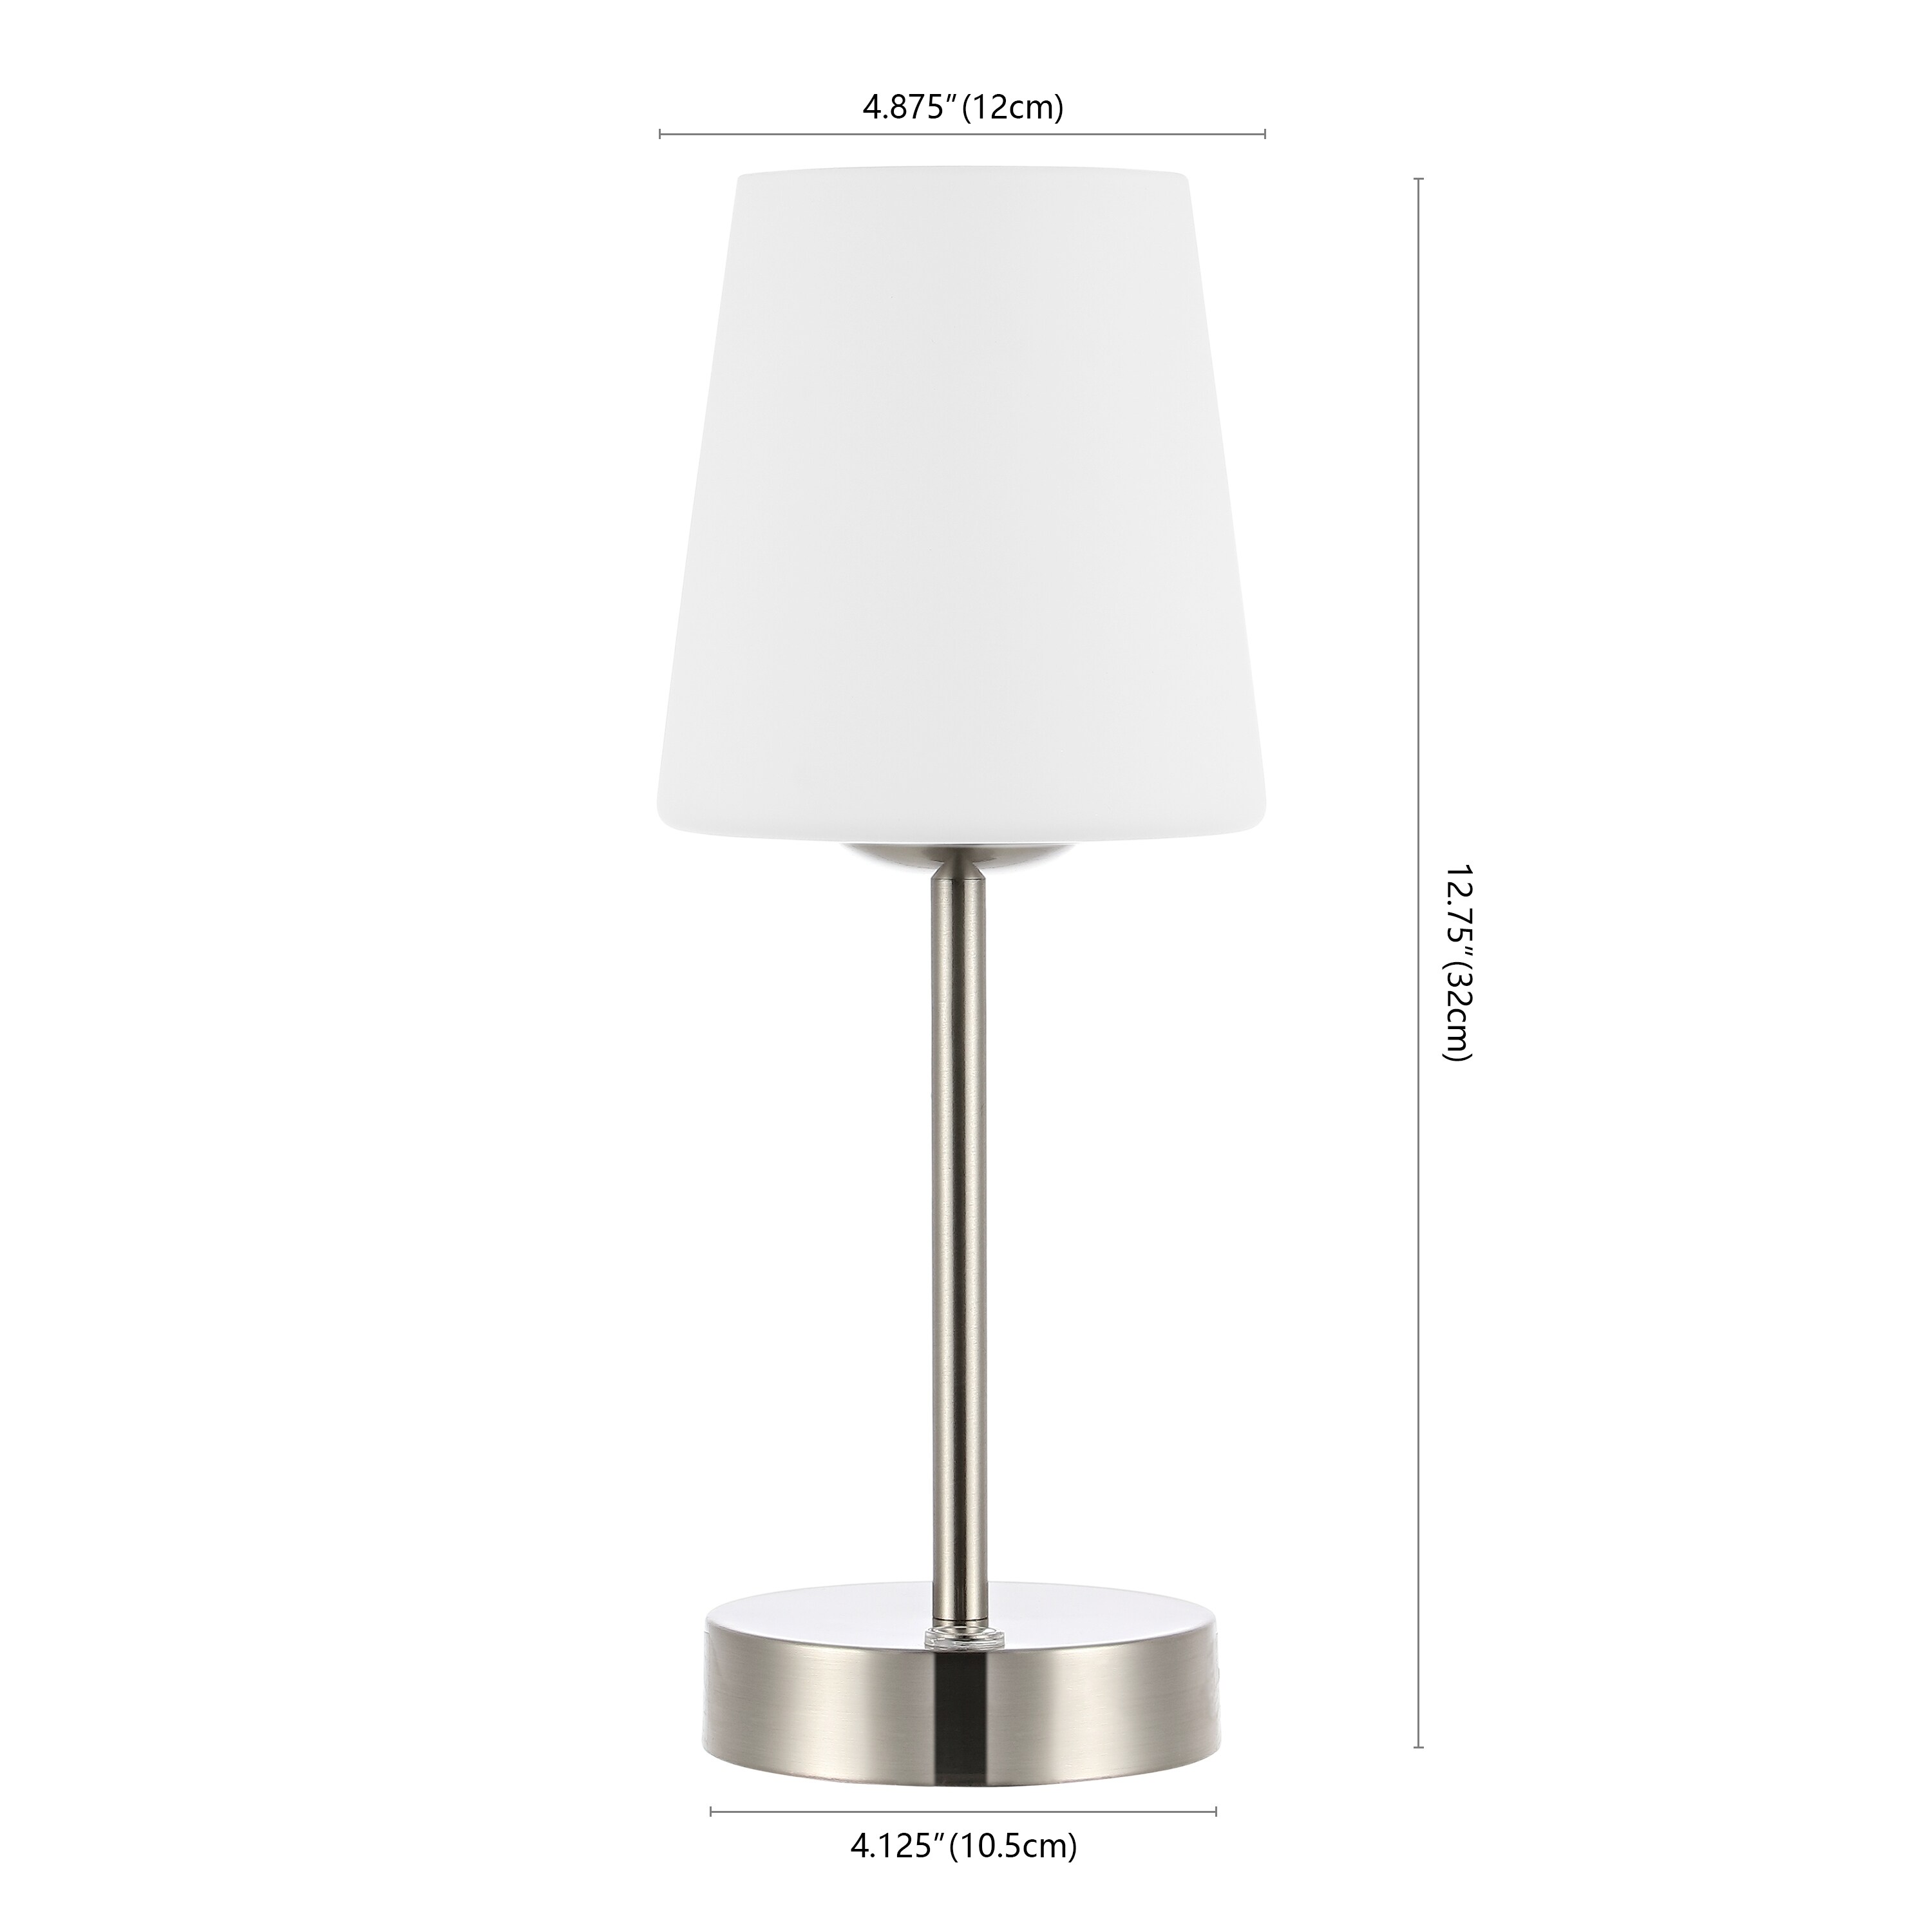 Wireless designer table lamps, the new trend